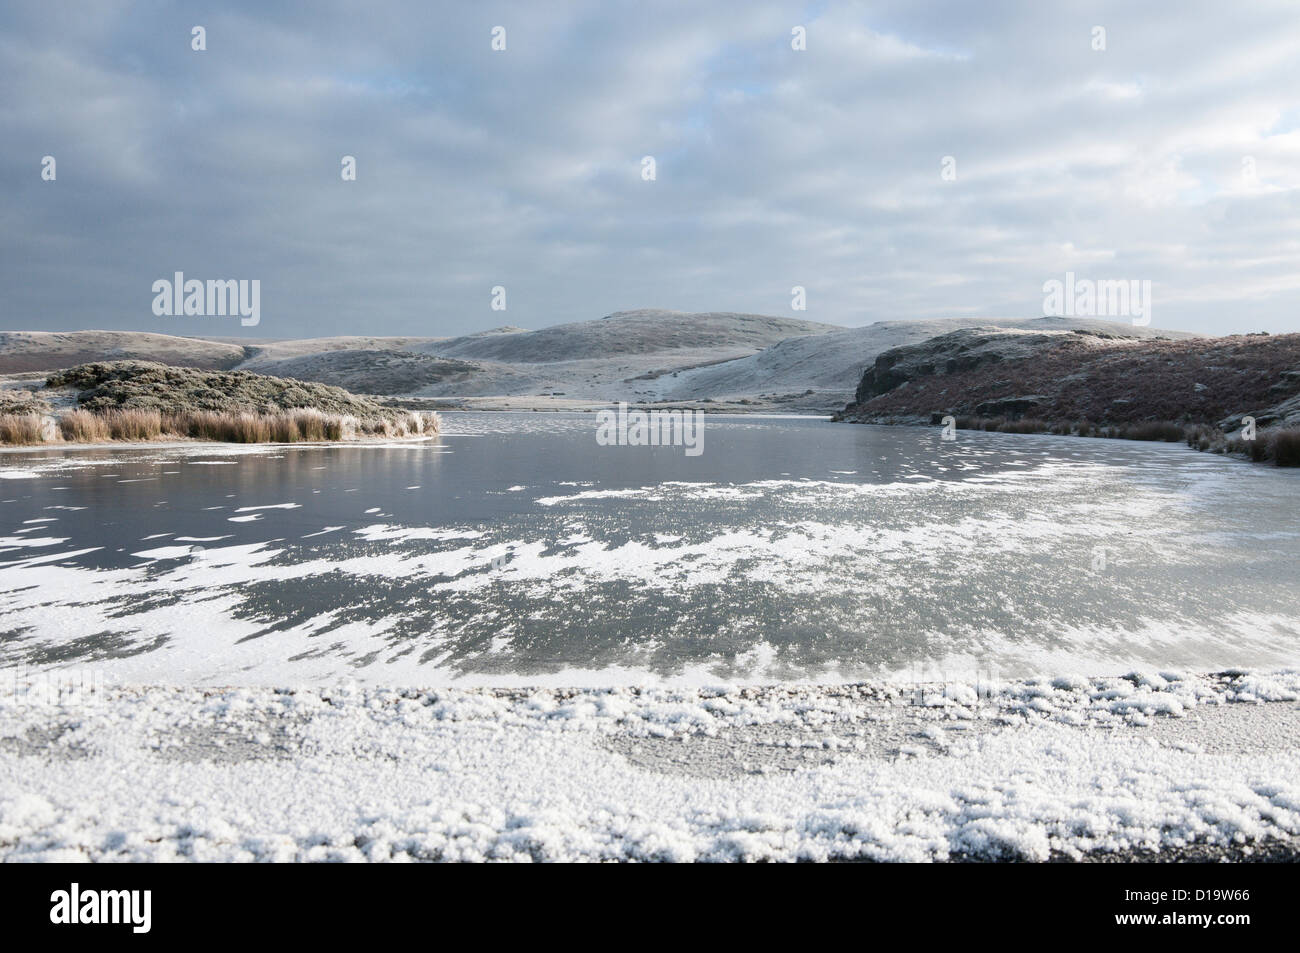 Powys County, Wales, UK. 12th December 2012. A lake freezes over in the Cambrian Mountains. Photo credit. Graham M. Lawrence/Alamy Live News. Stock Photo